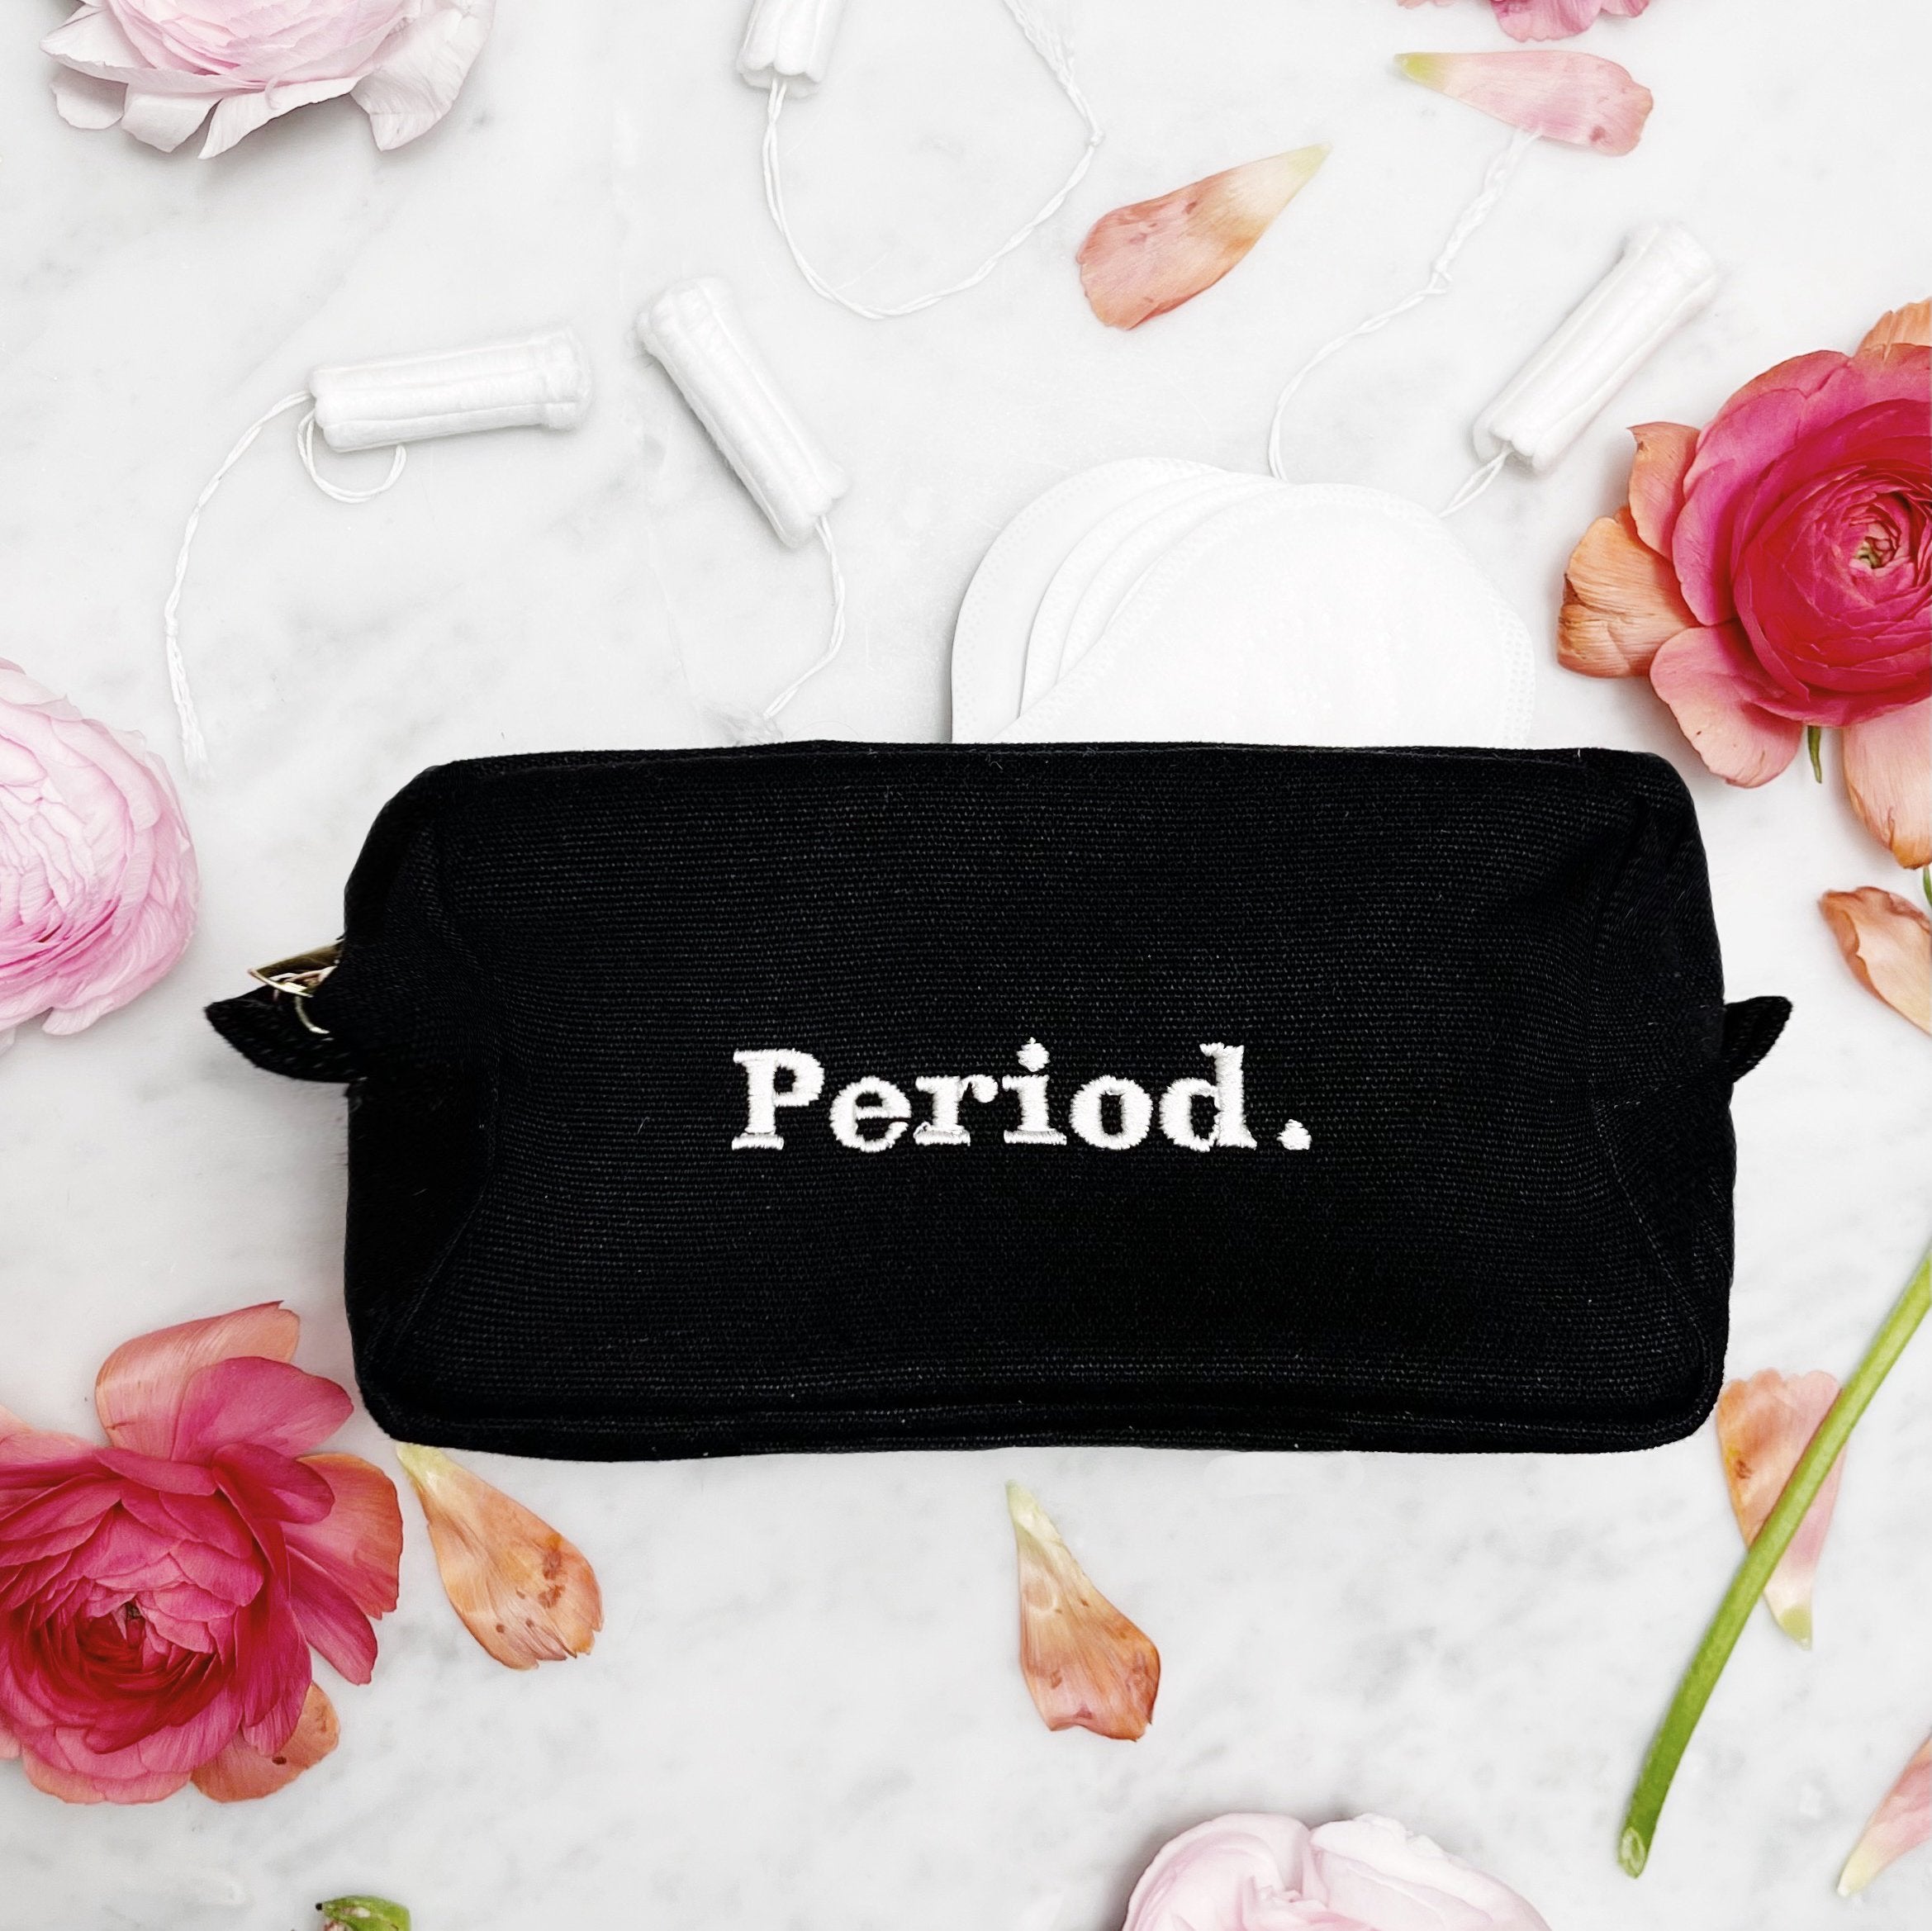 Your Guide to Stress-Free Travel During Your Period